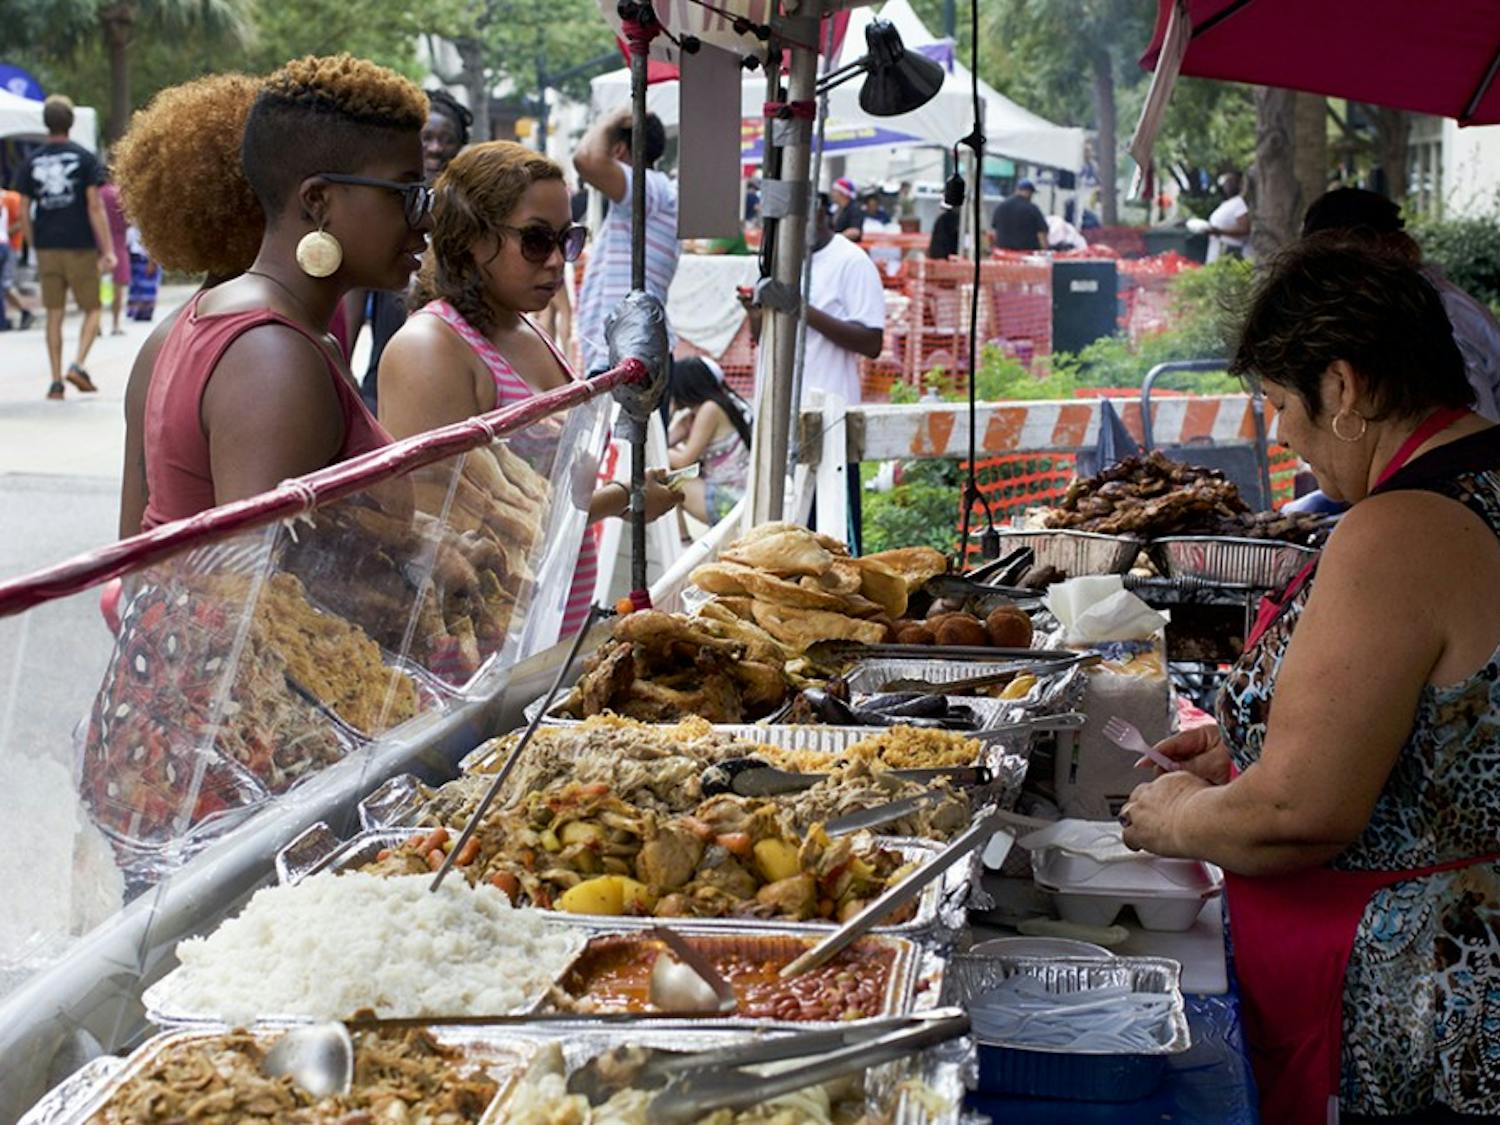 The Main Street Latin Festival offered many traditional Hispanic foods and dishes.&nbsp;